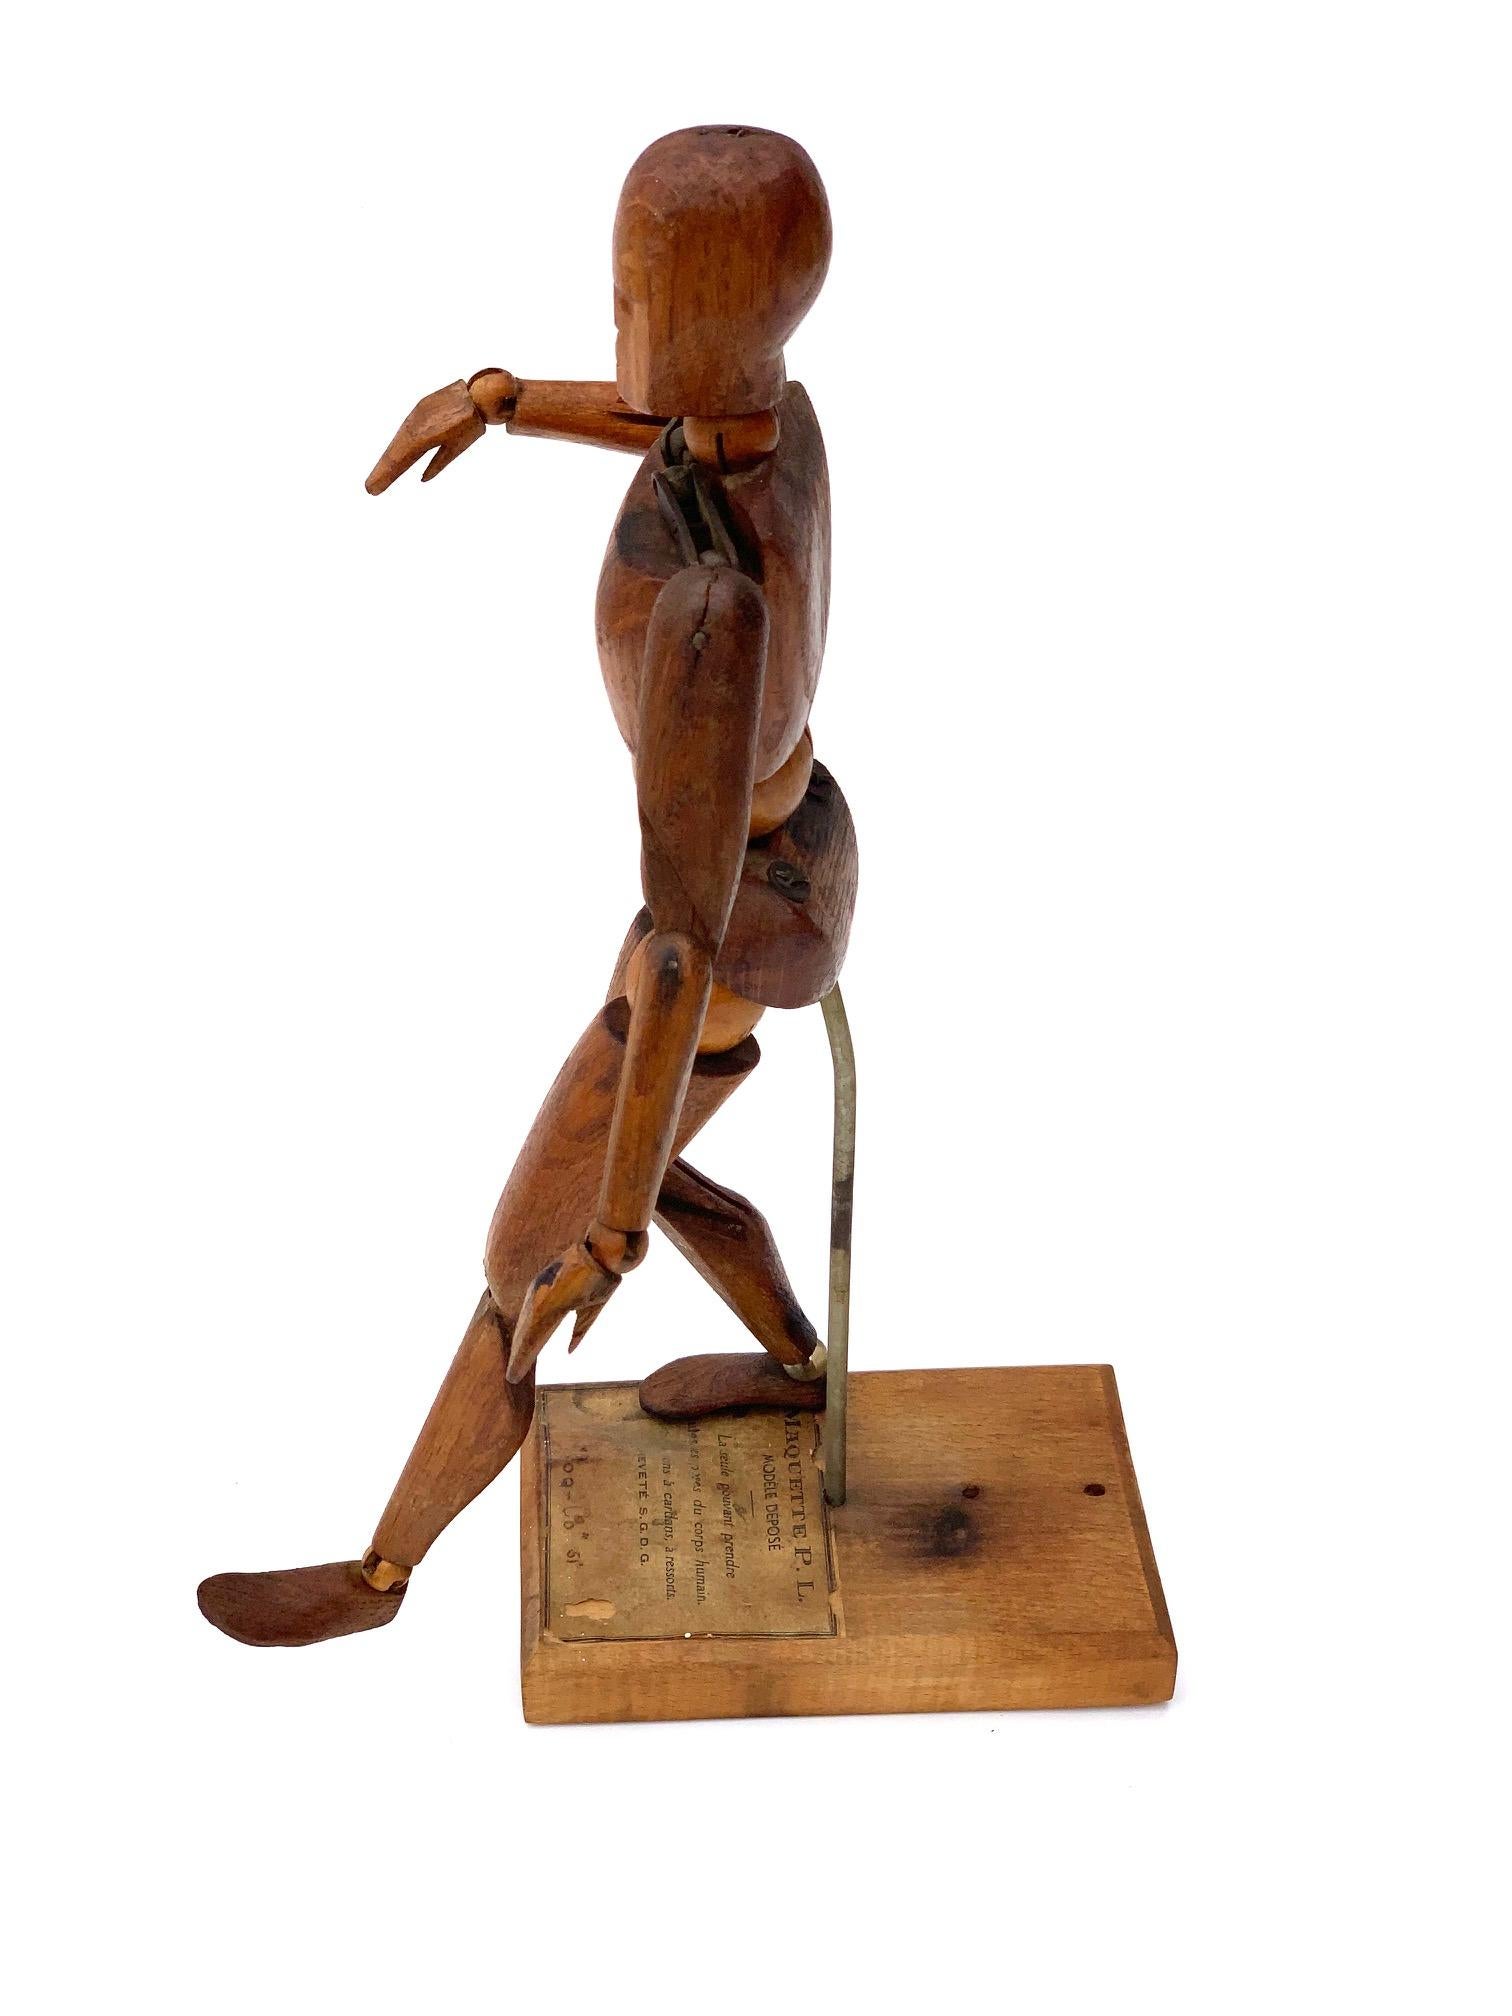 Other Mid-19th Century French Articulated Artist Model